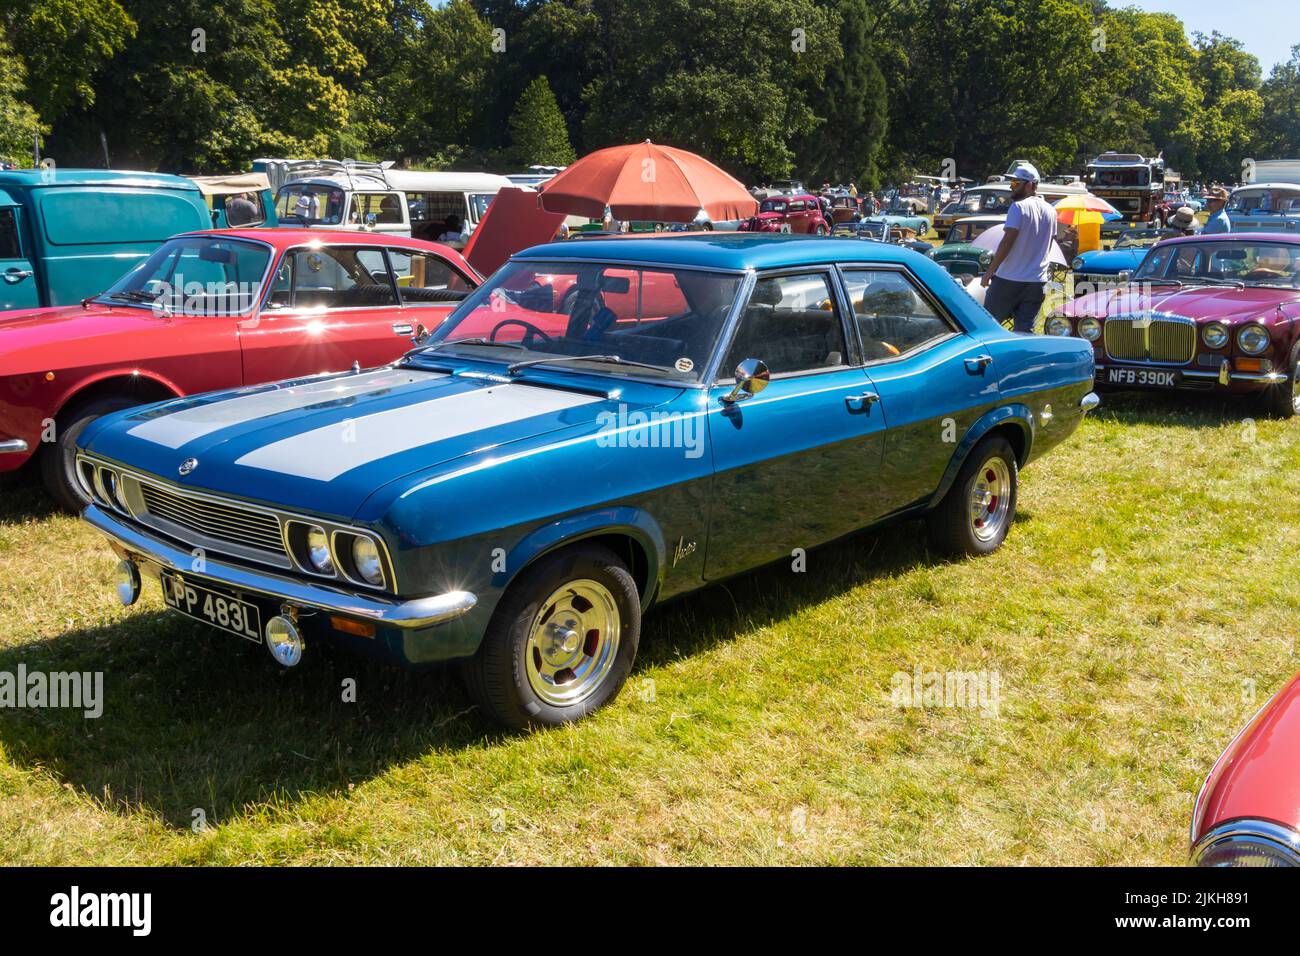 vintage 1972 blue vauxhall victor at classic car show Stock Photo